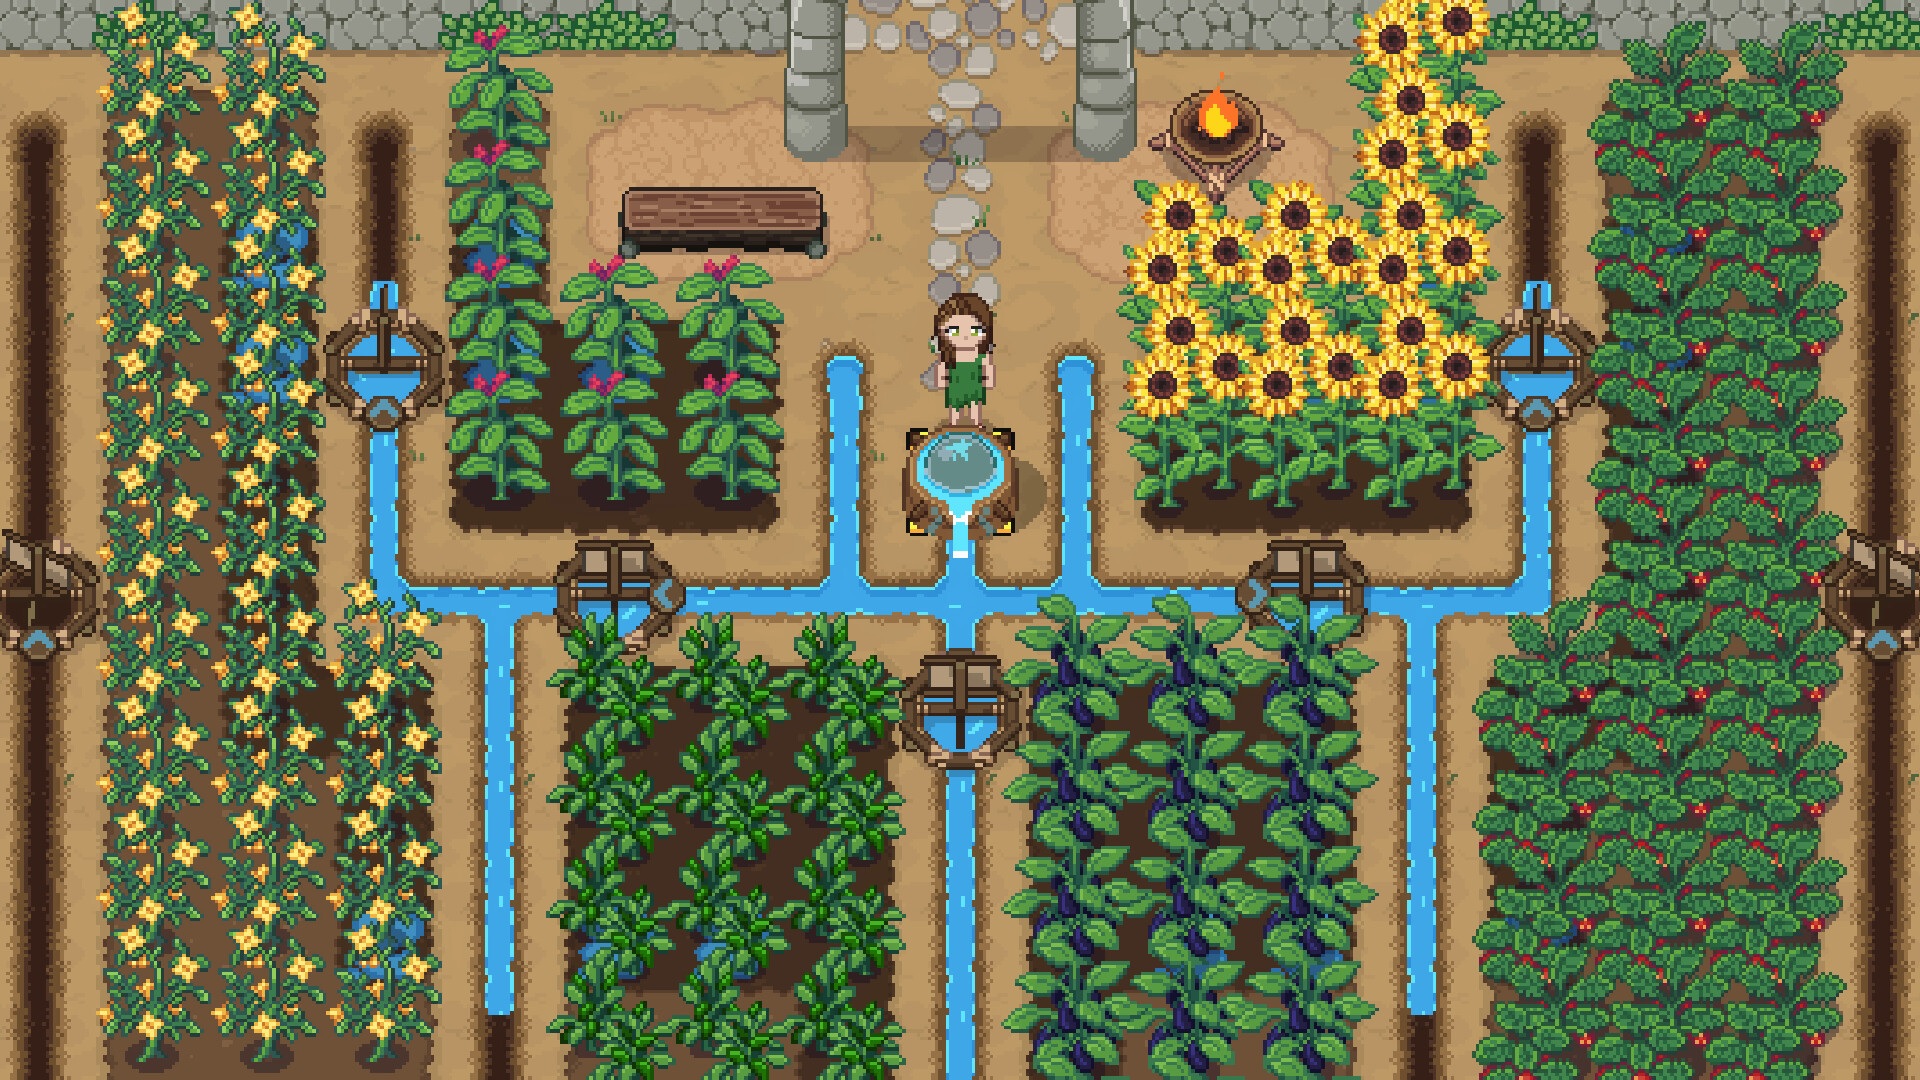  Roots of Pacha just became my favorite Stardew Valley-alike 